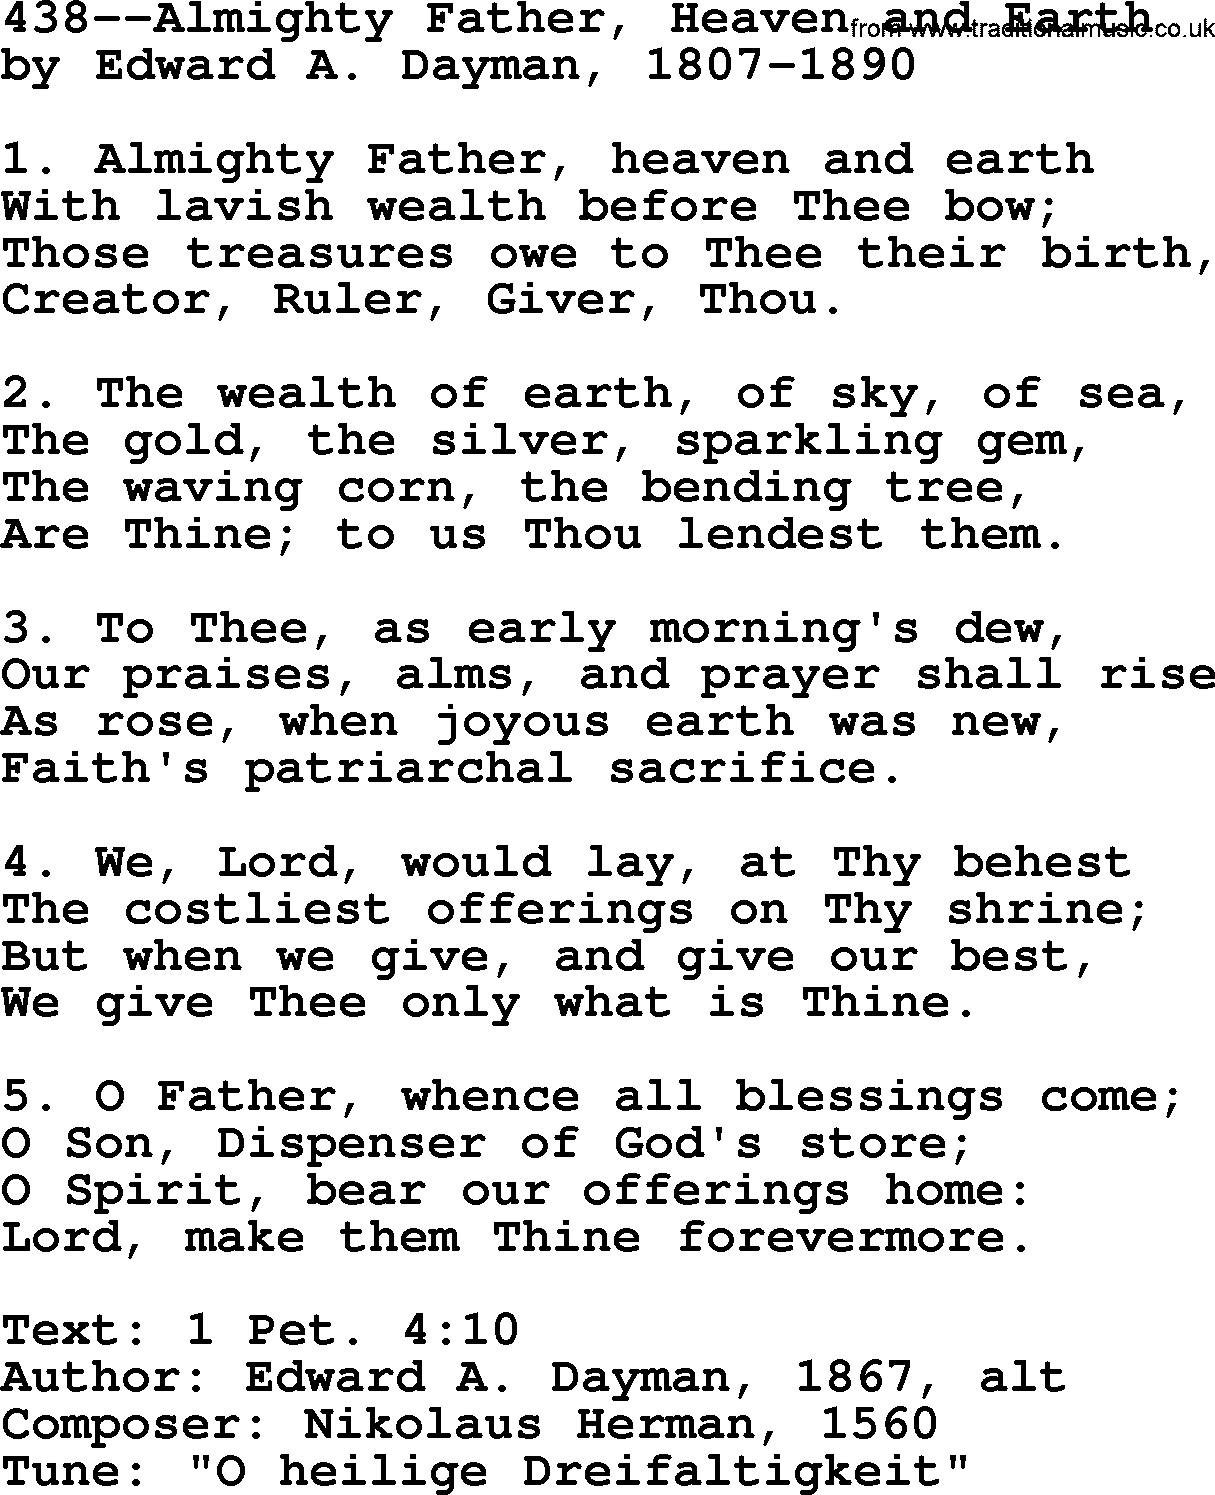 Lutheran Hymn: 438--Almighty Father, Heaven and Earth.txt lyrics with PDF